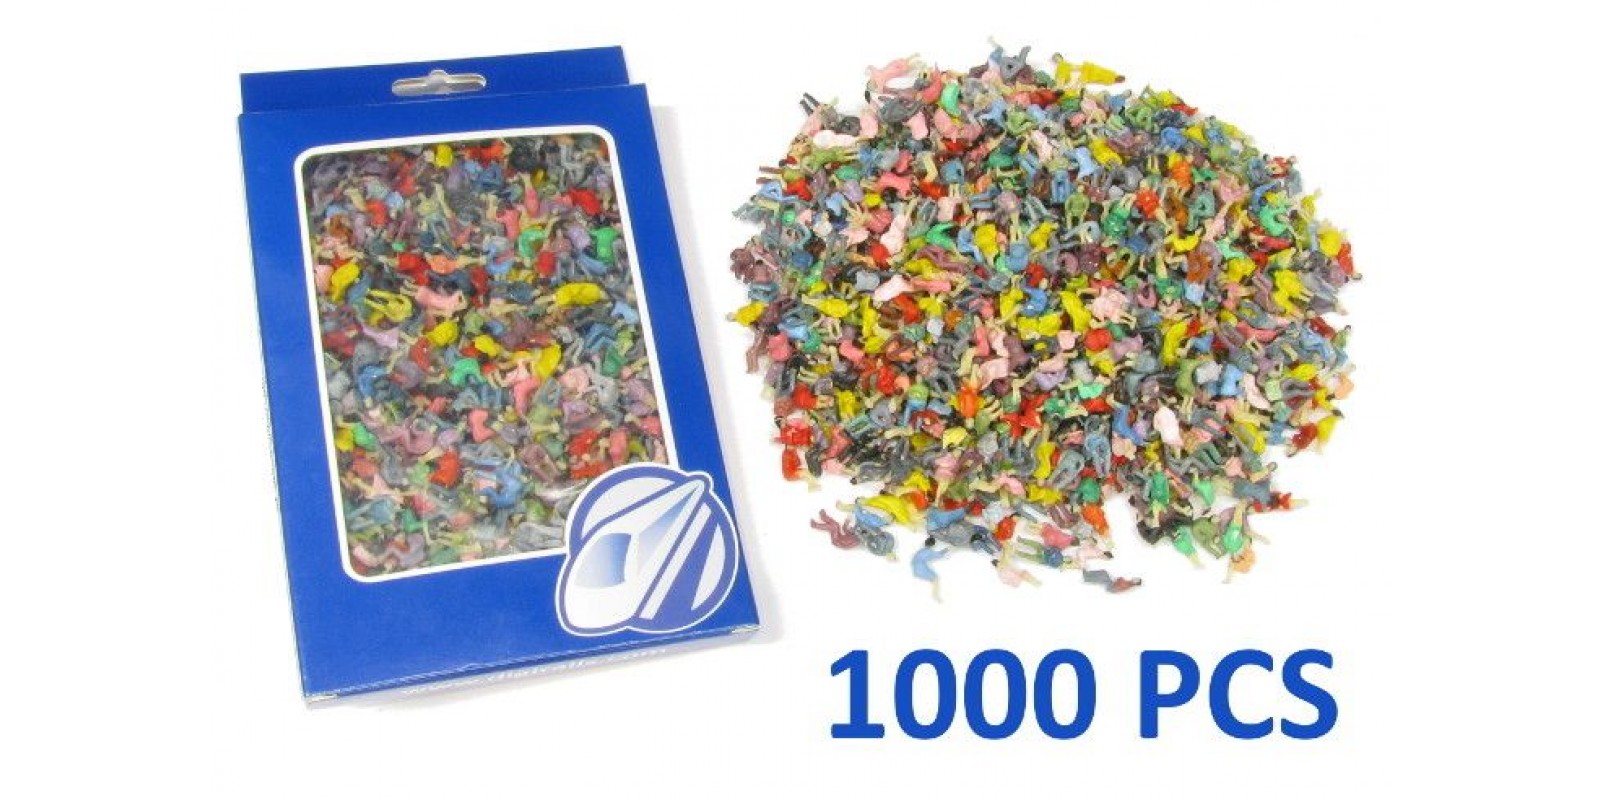 DG60125_H0 Set of 1000 painted figures SITTING in scale H0 (1:87)